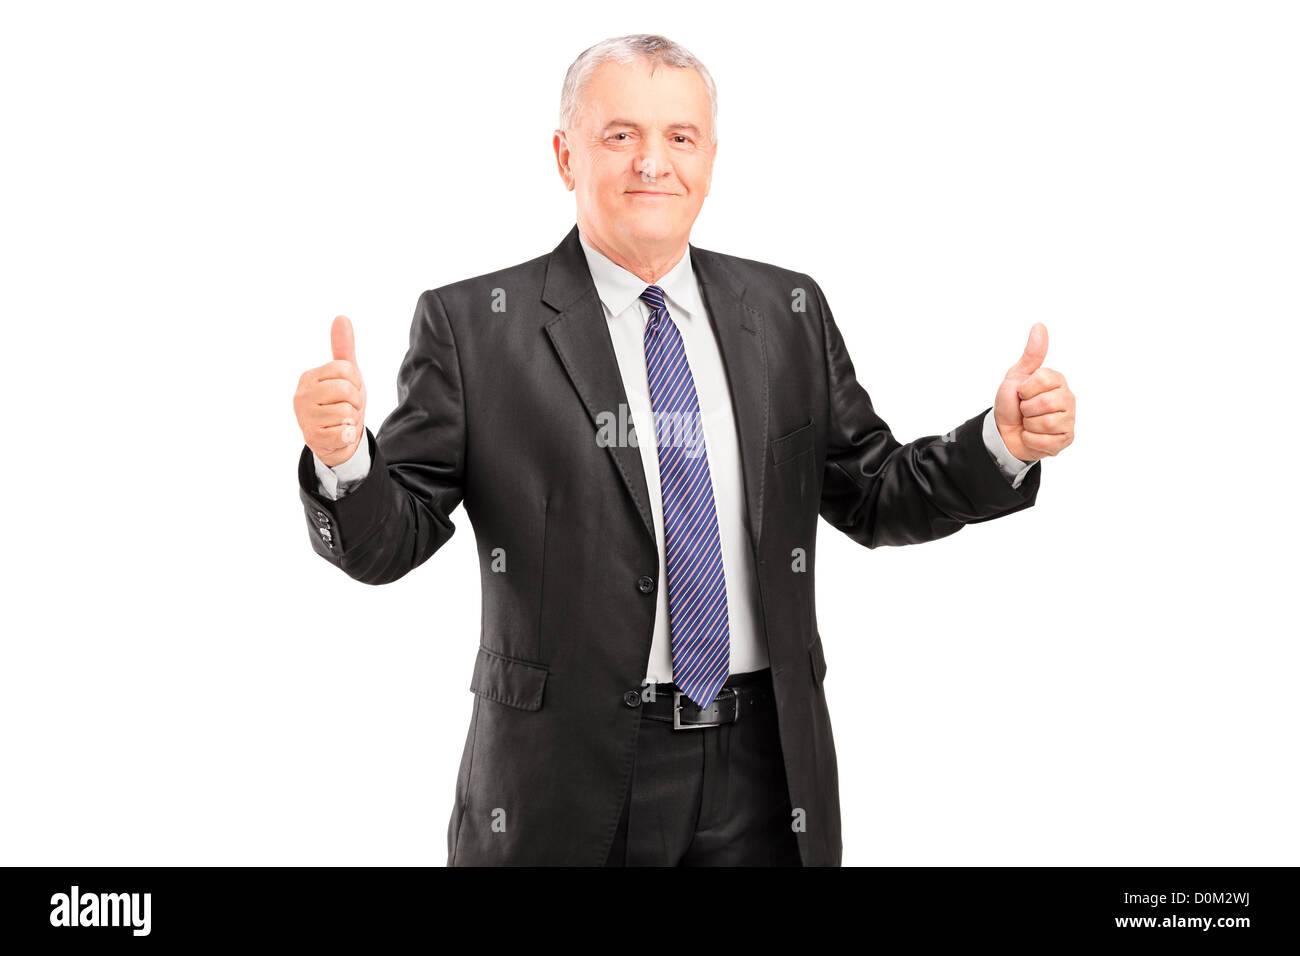 Happy mature businessperson standing and giving thumbs up isolated on white background Stock Photo